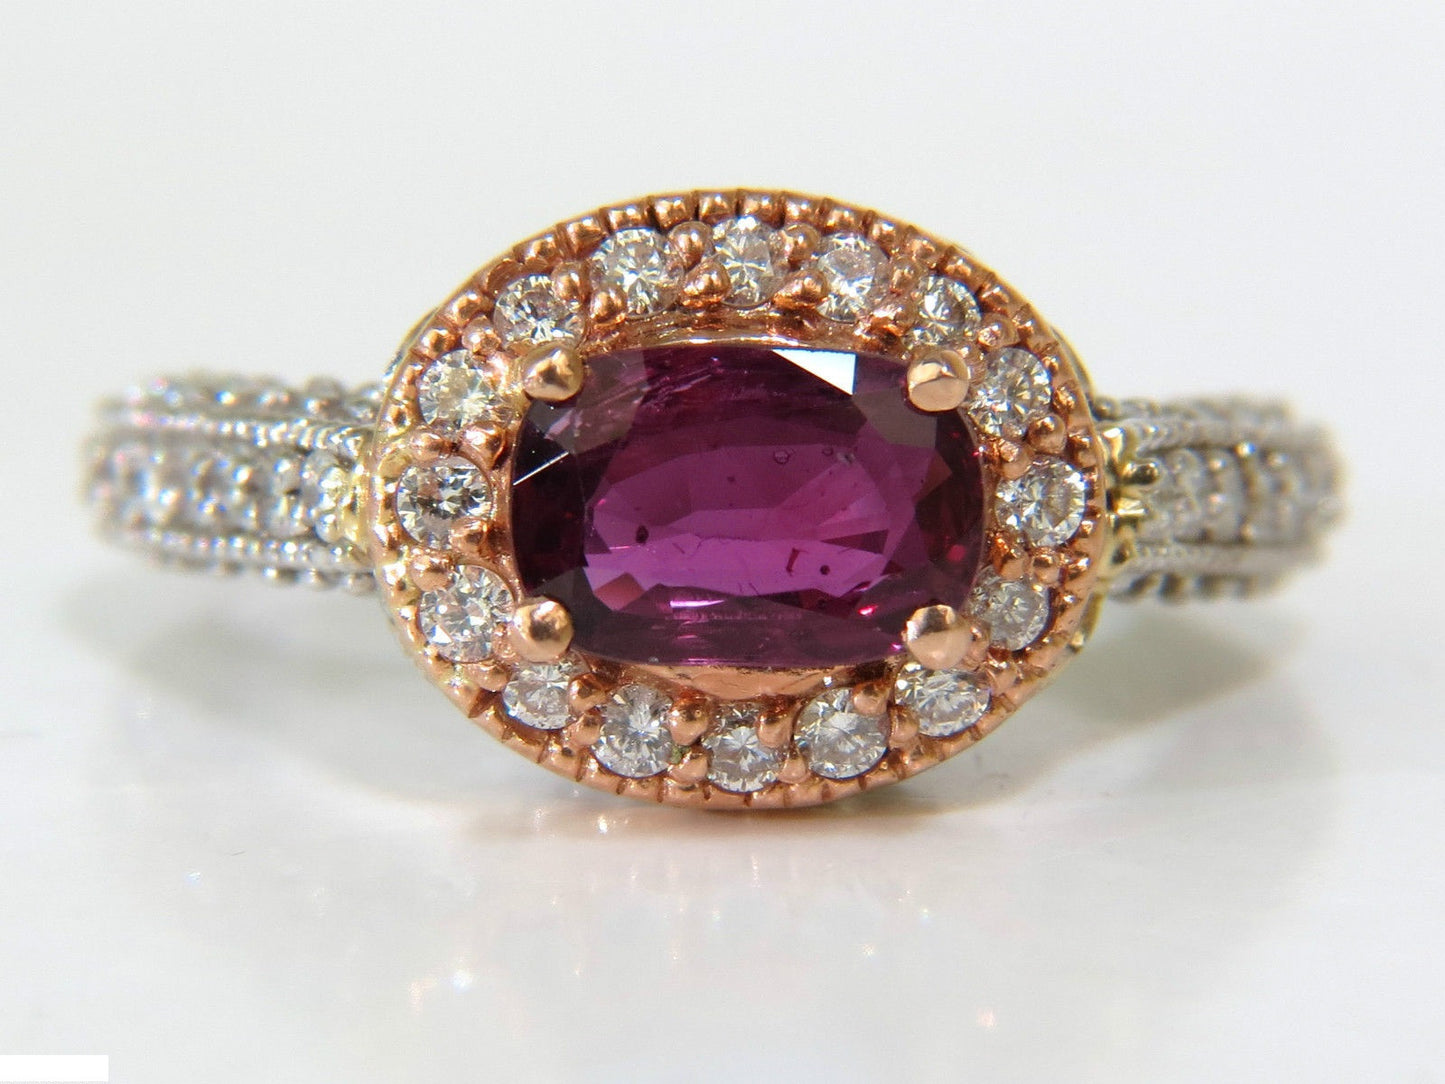 2.78CT NATURAL FINE PURPLE RED RUBY DIAMOND RING 14KT G/VS